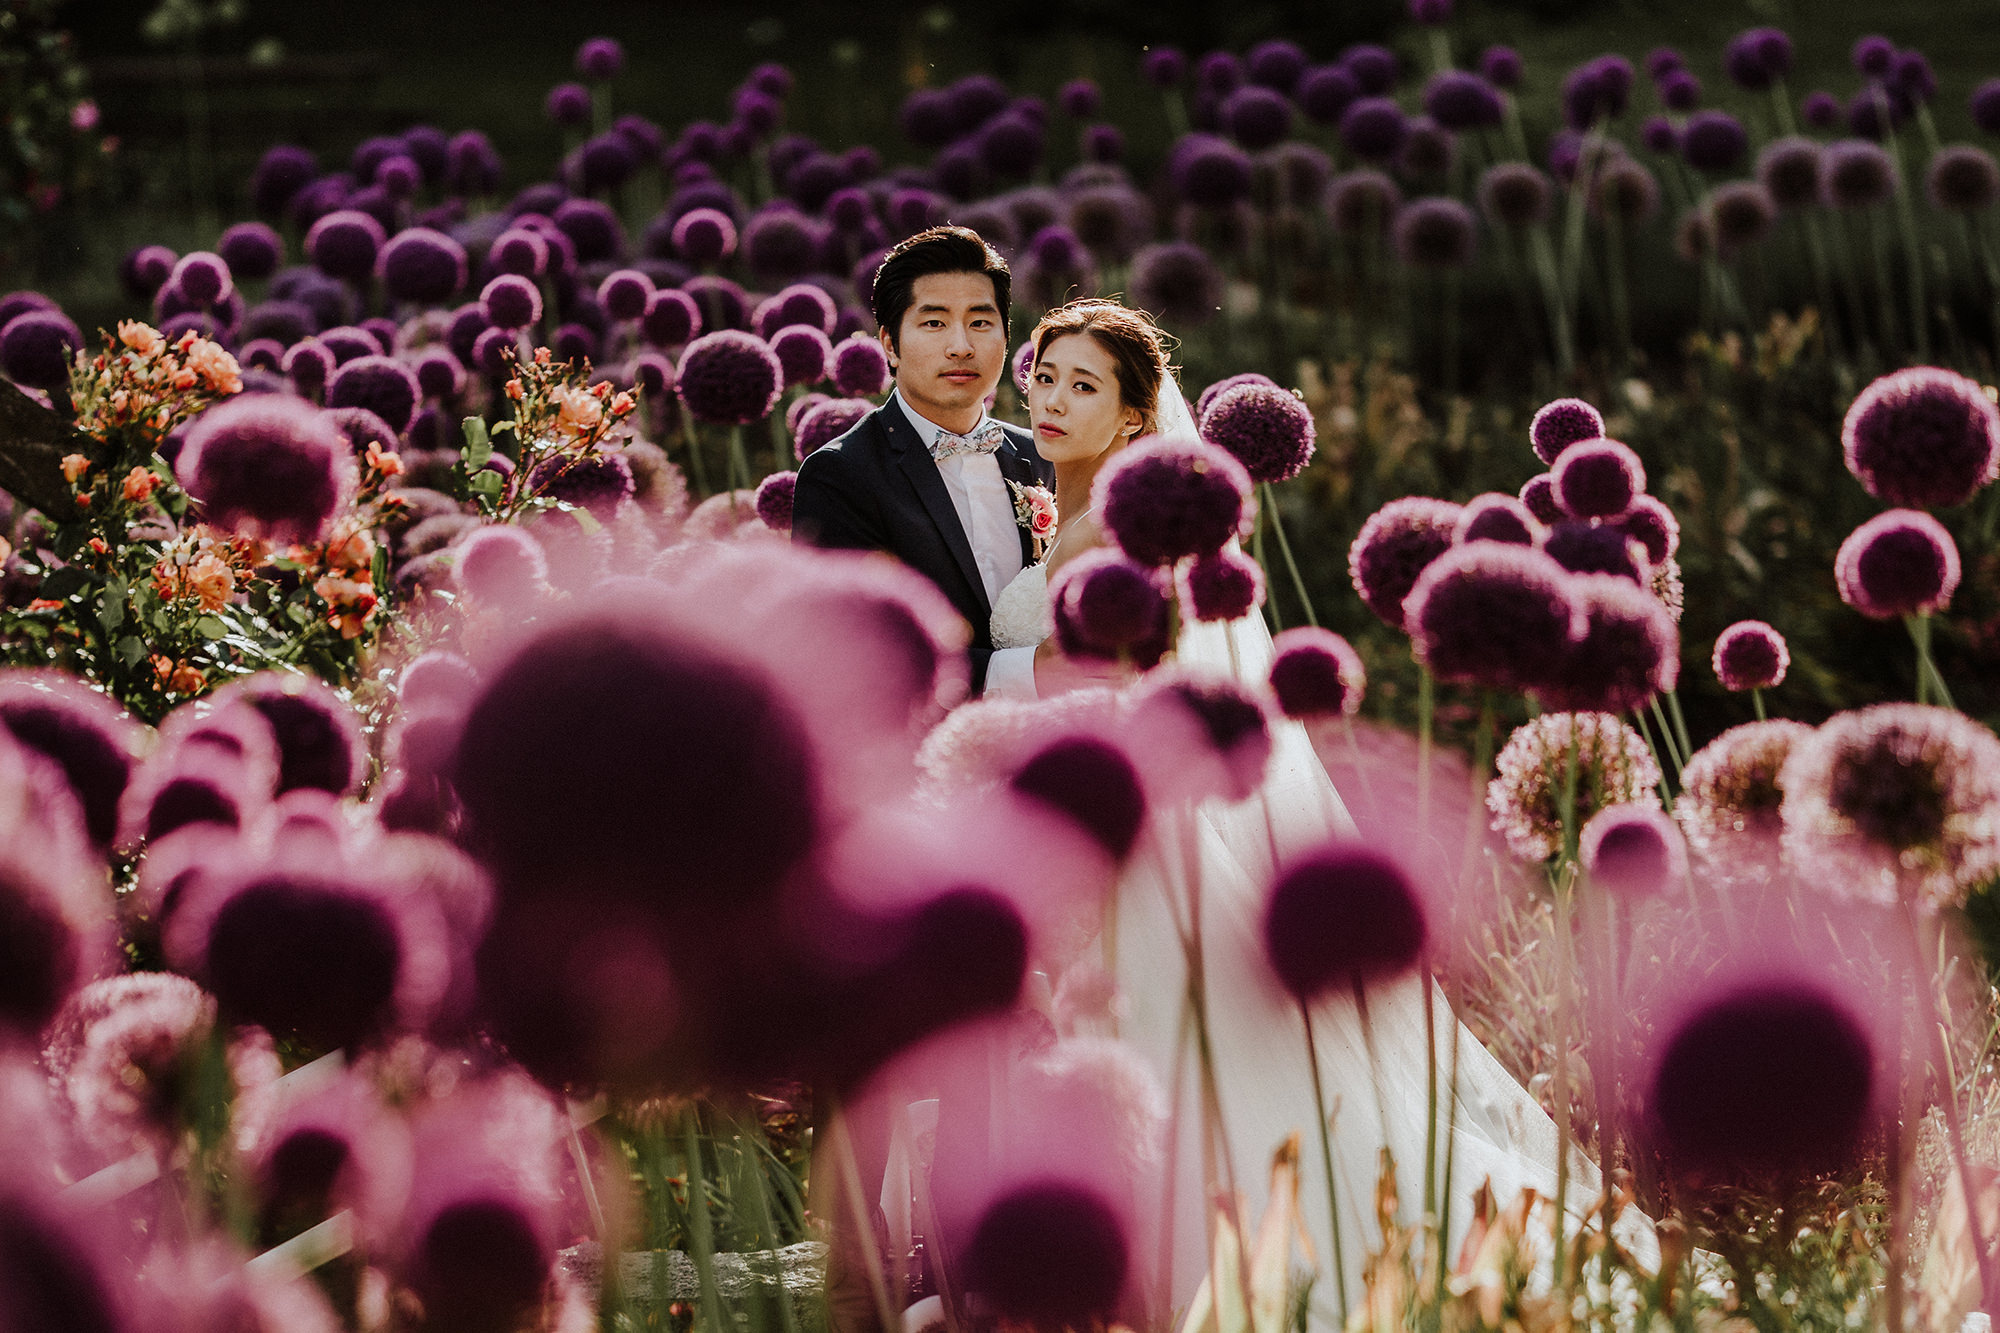 Bride and groom in the midst of some big purple flowers